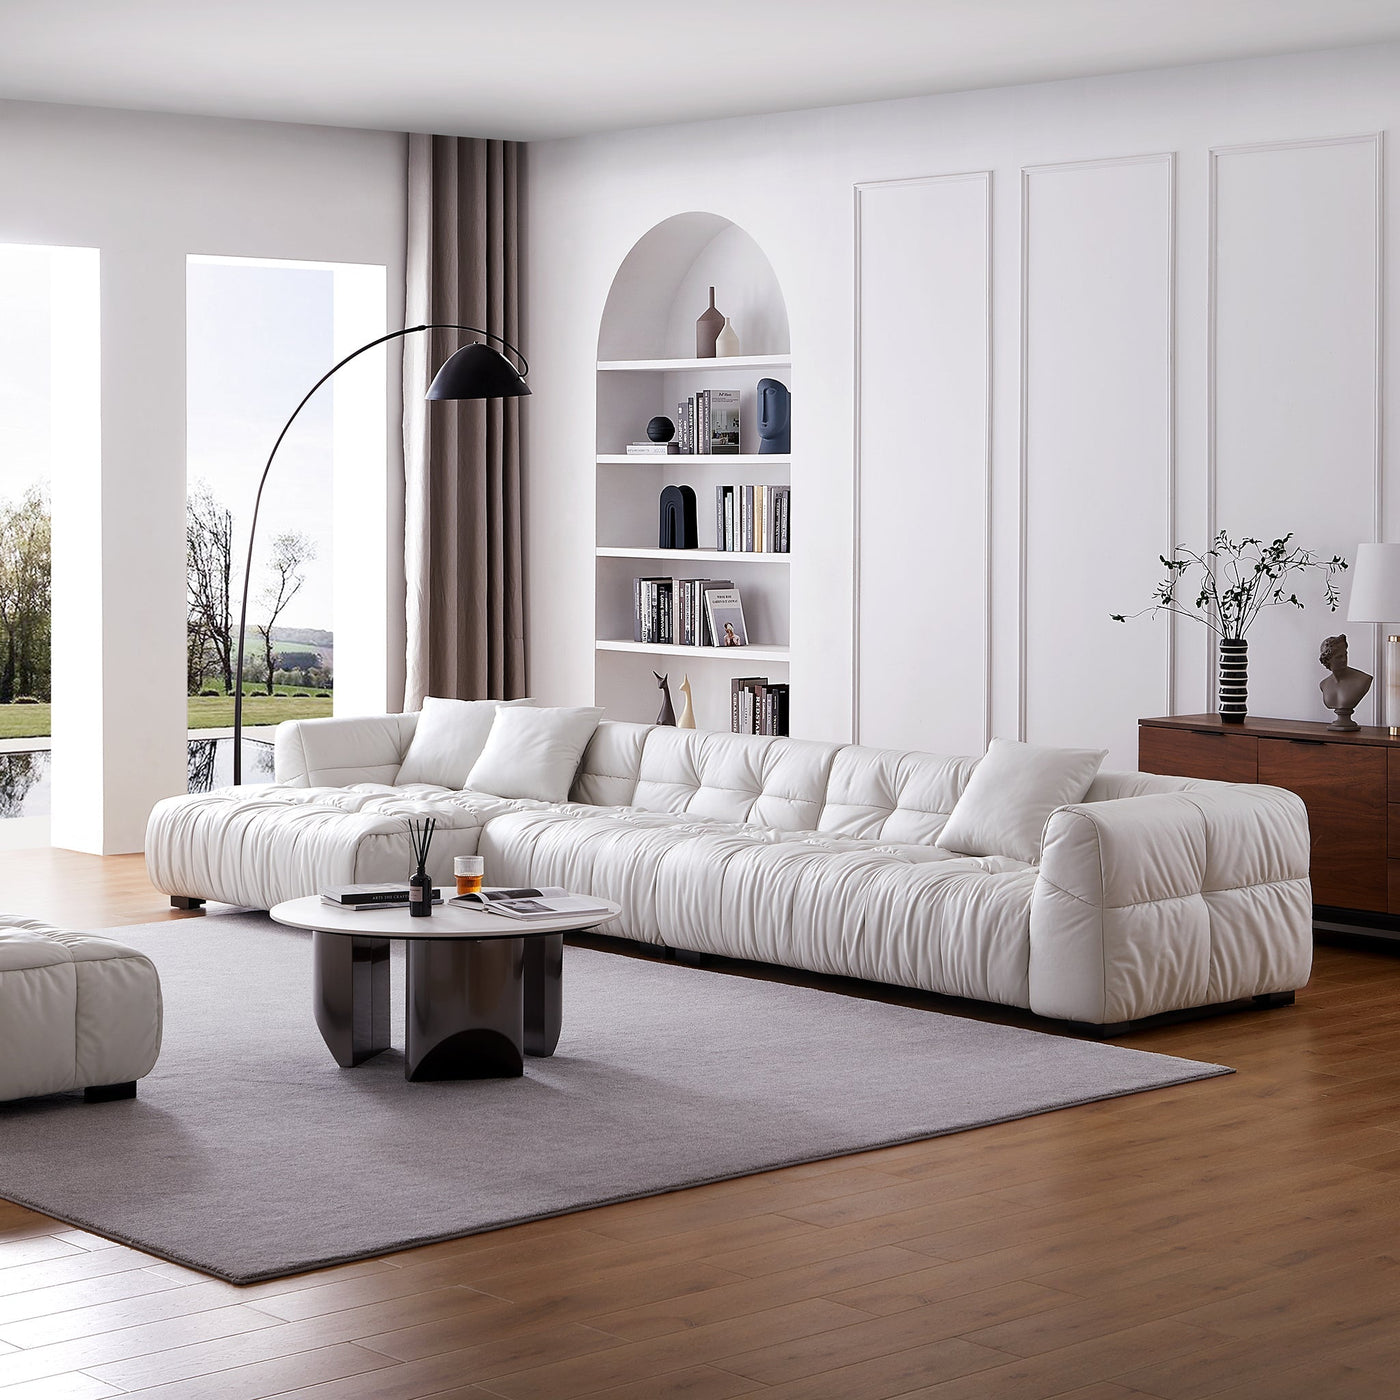 Boba Black Leathaire Sectional Set-White